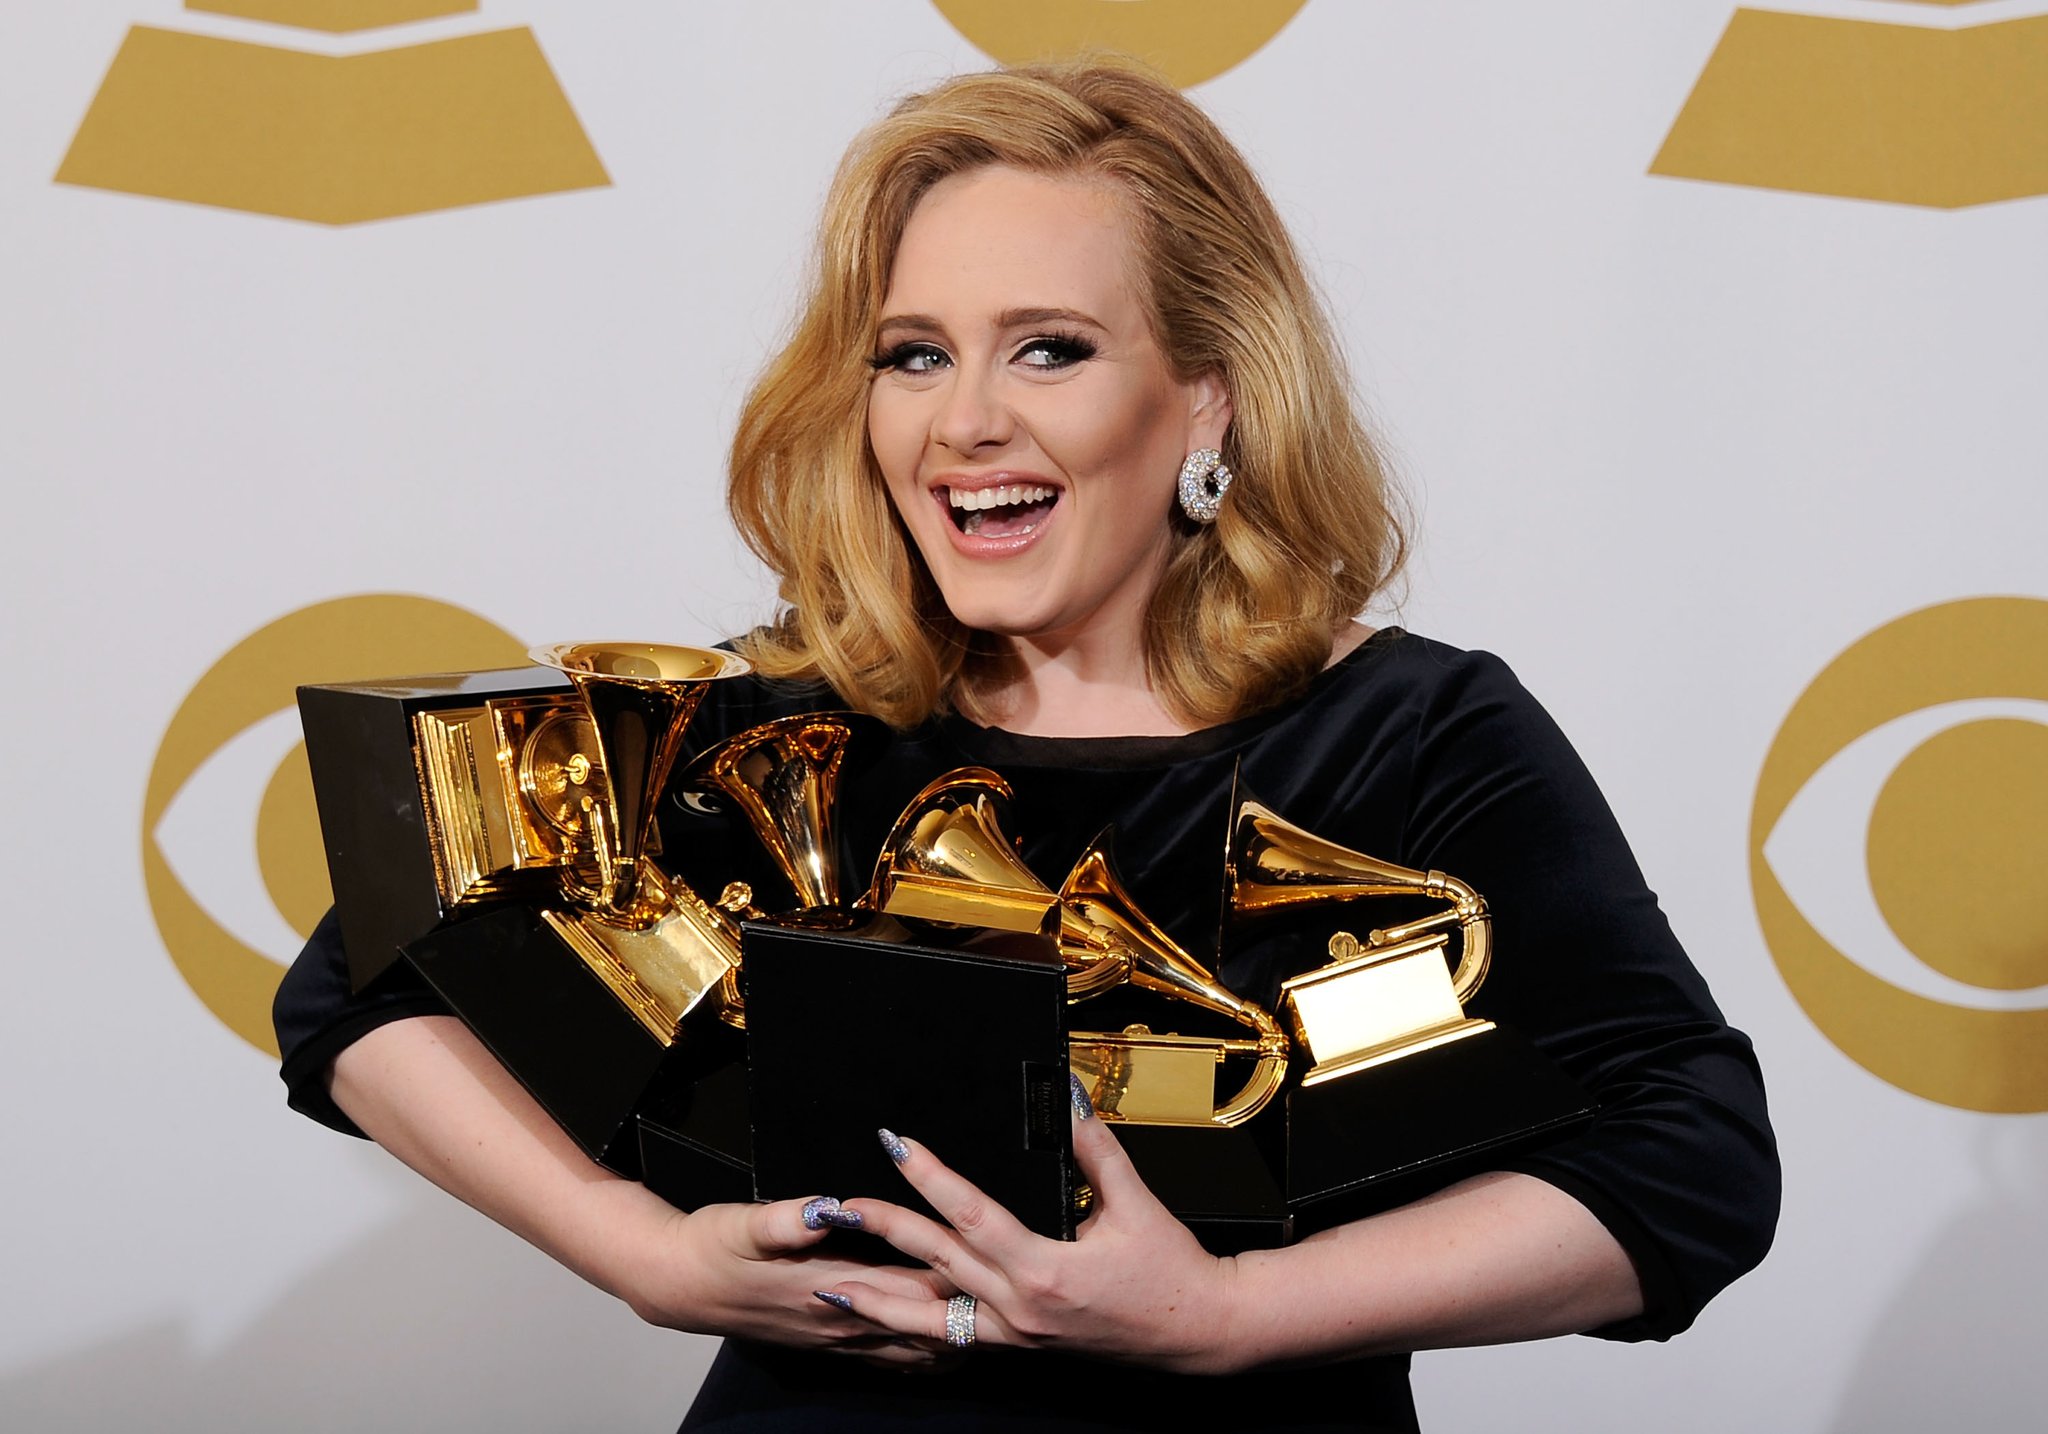 Happy Birthday Adele  Thirty-free is a phrase we are now all saving in our minds. 